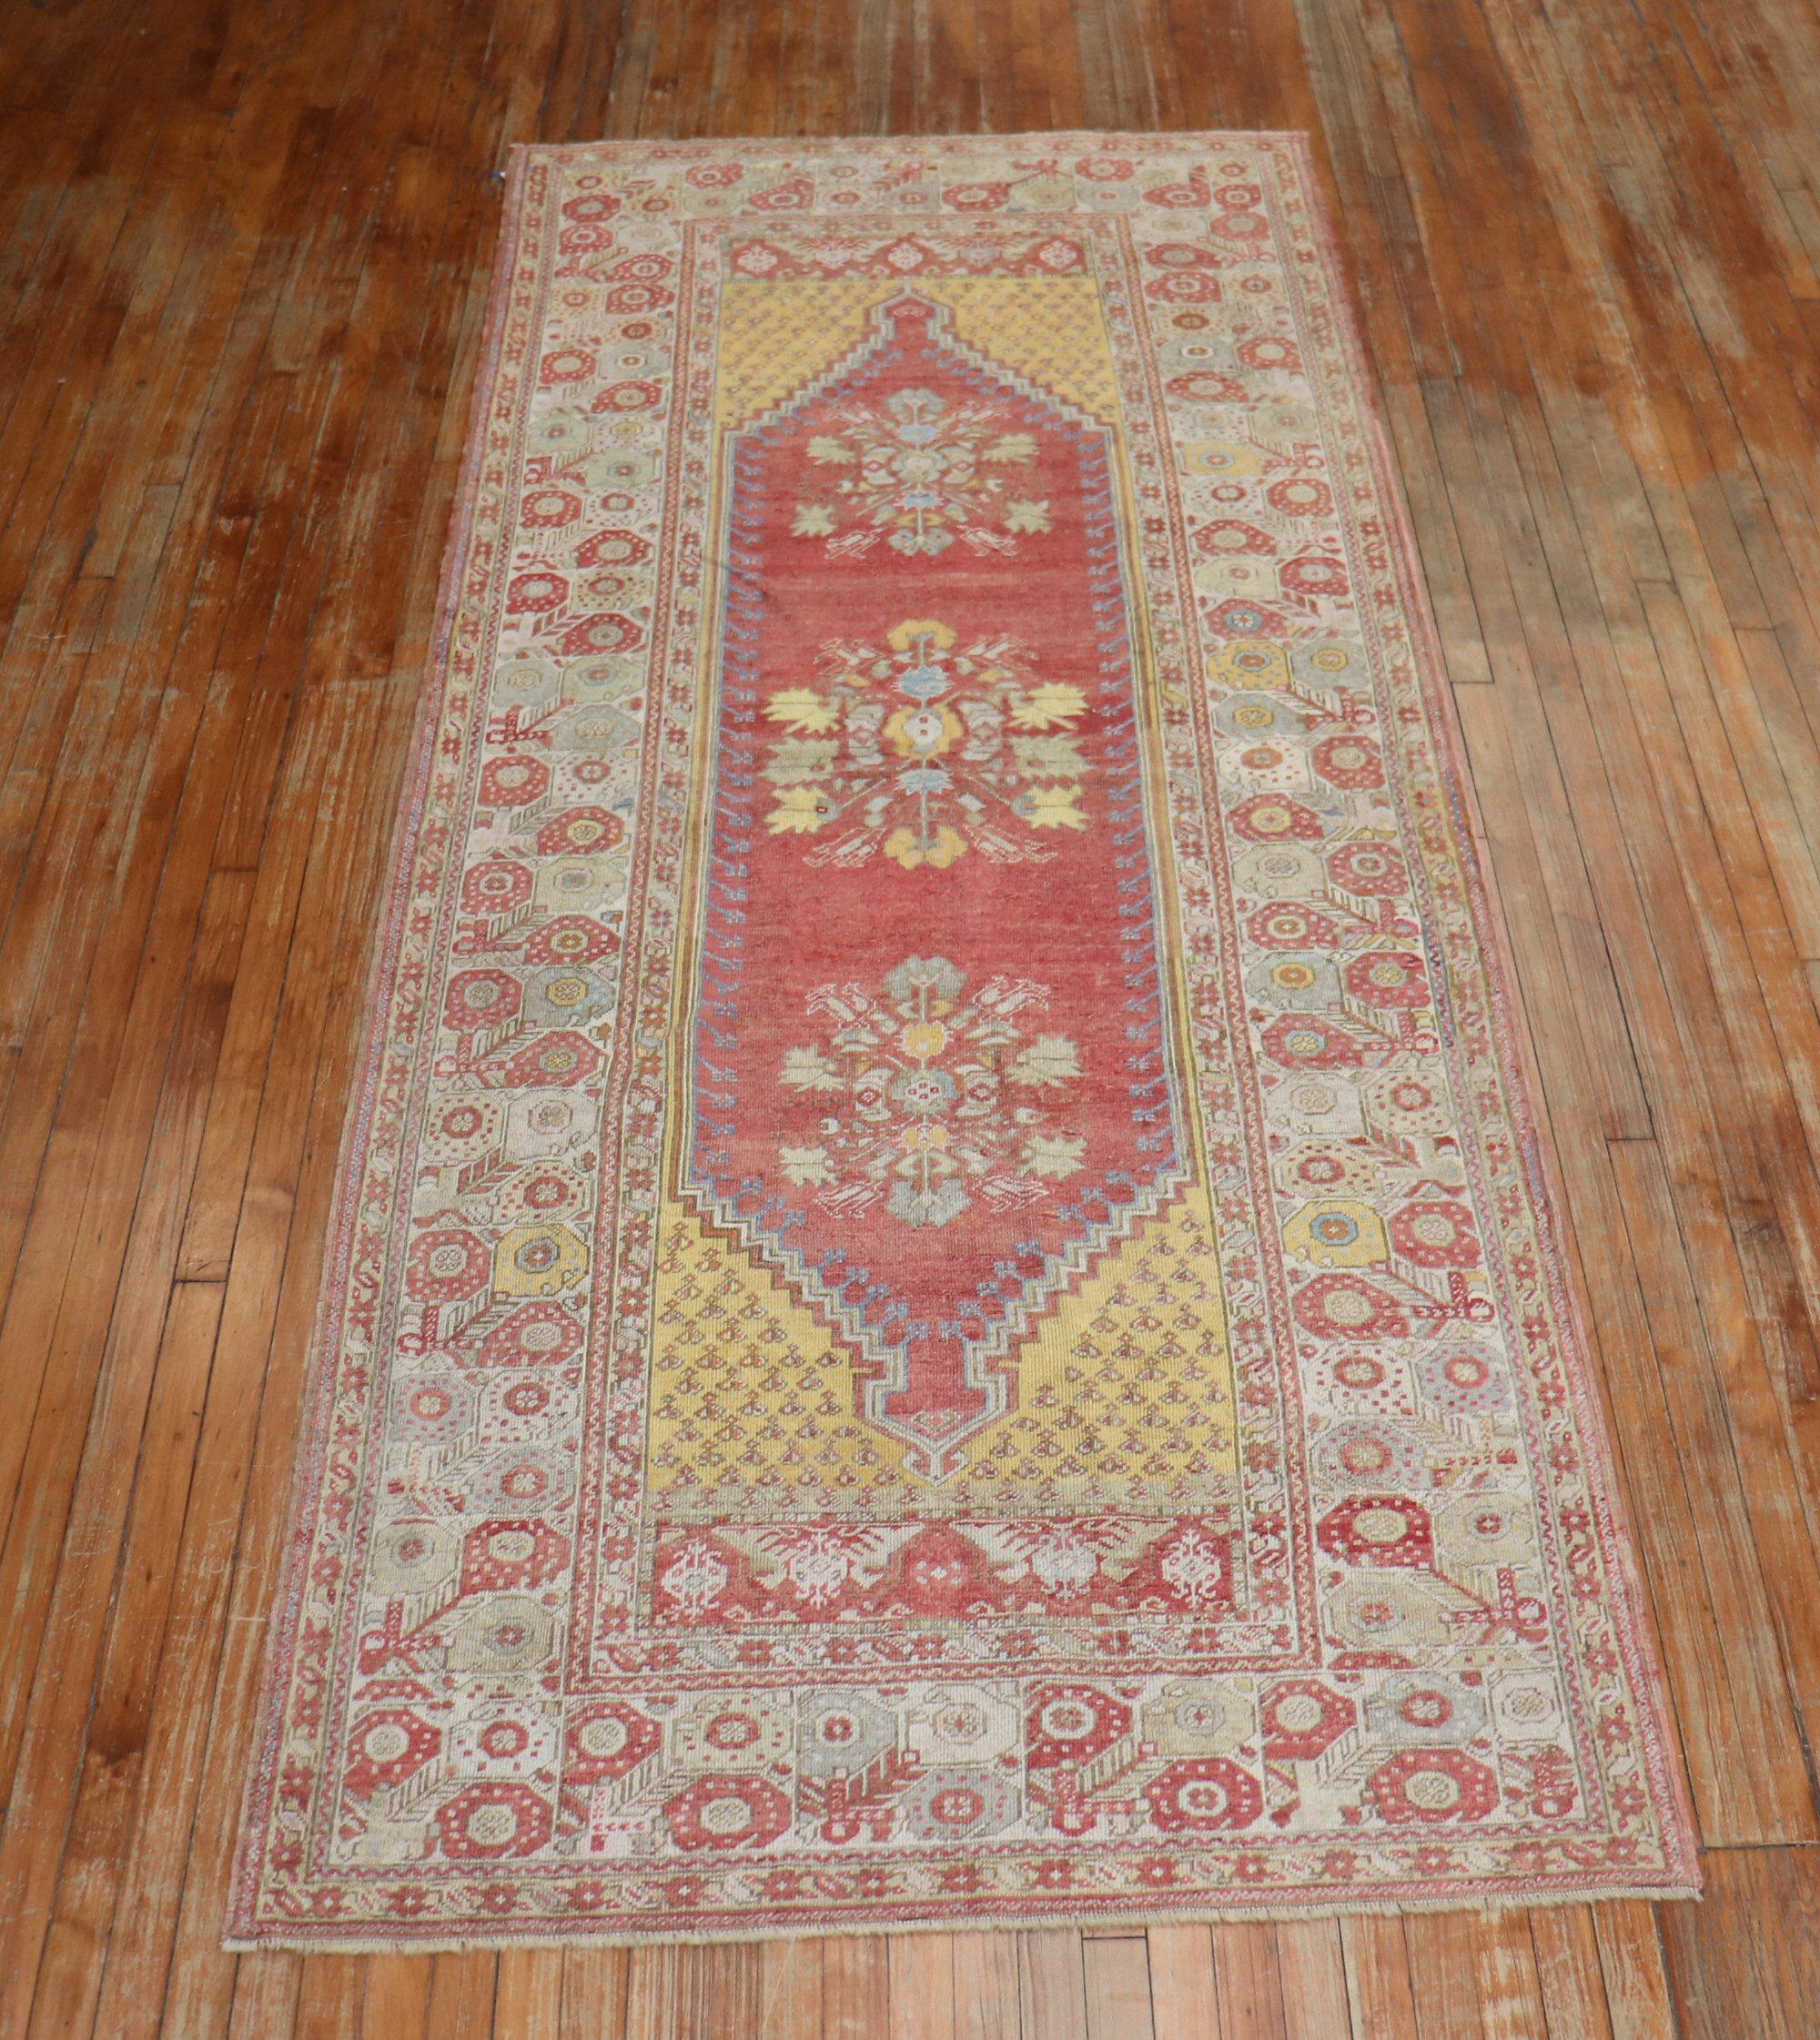 A fine quality Early 20th-century wide Turkish runner with a floral motif in warm colors

Measures: 4'5” x 10'10”.